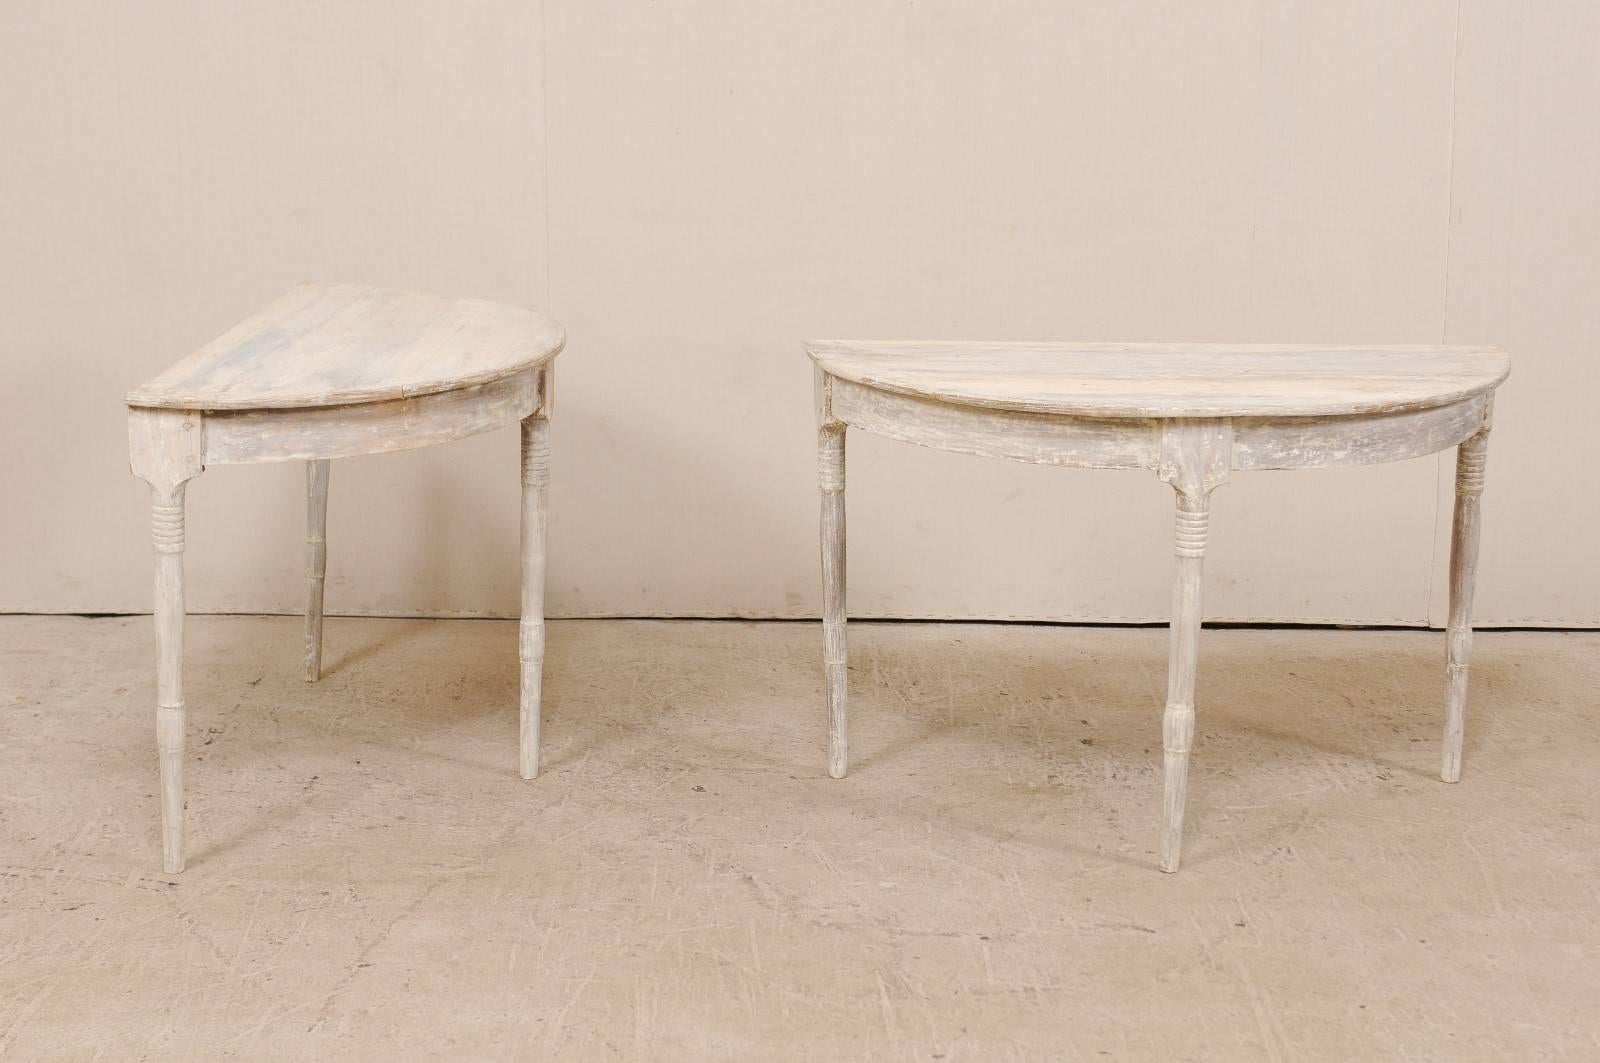 Wood Pair of 19th Century Swedish Demilune Tables in Pale Grey and White Hues